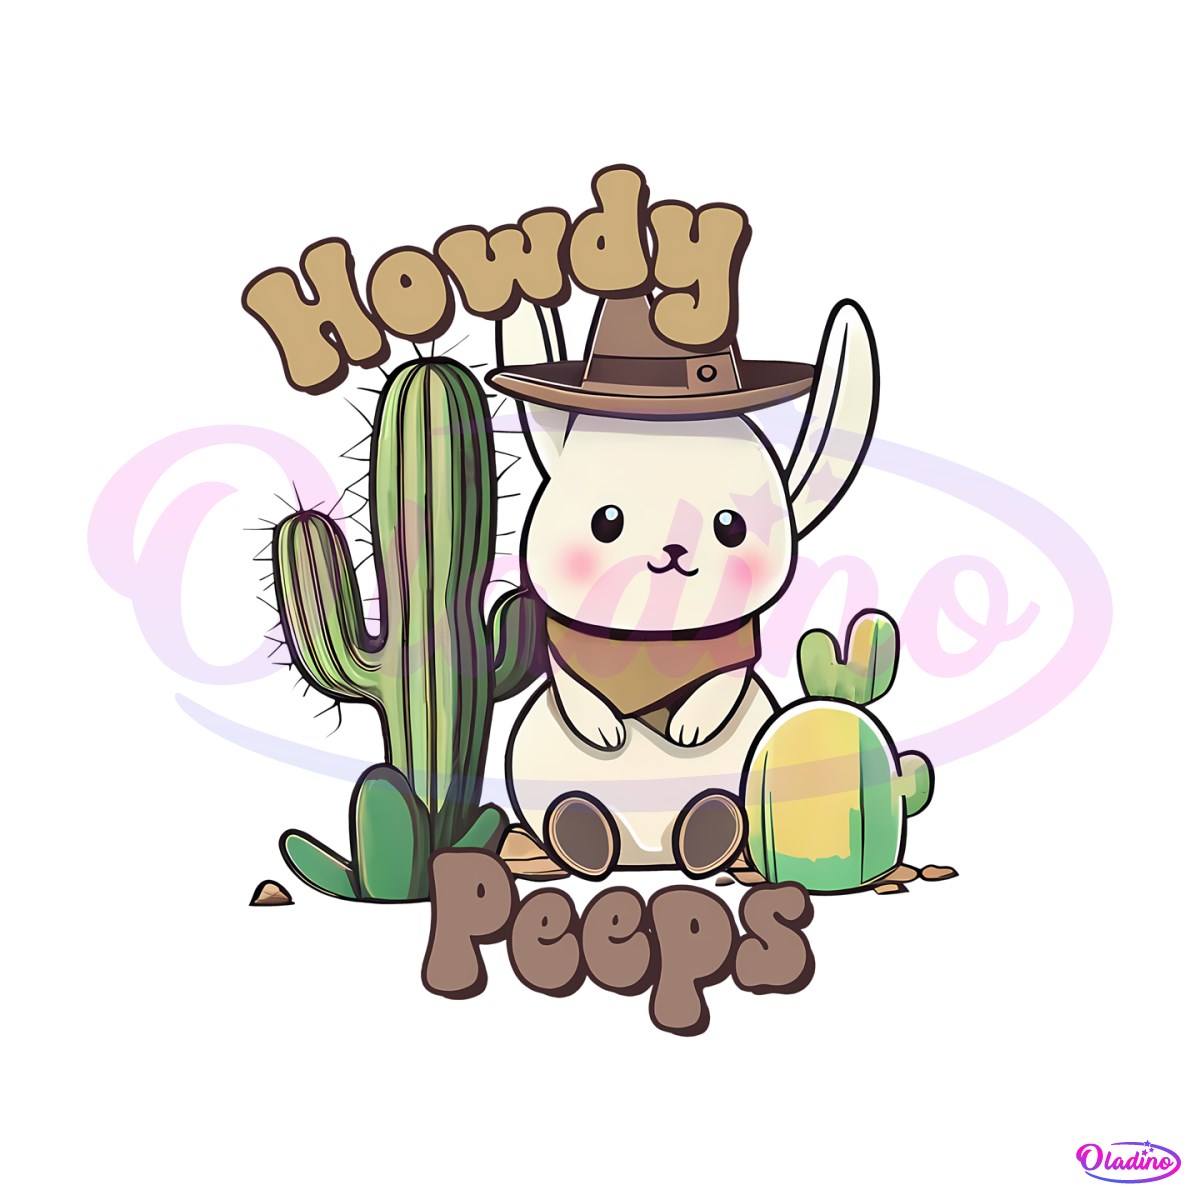 retro-easter-day-howdy-peeps-png